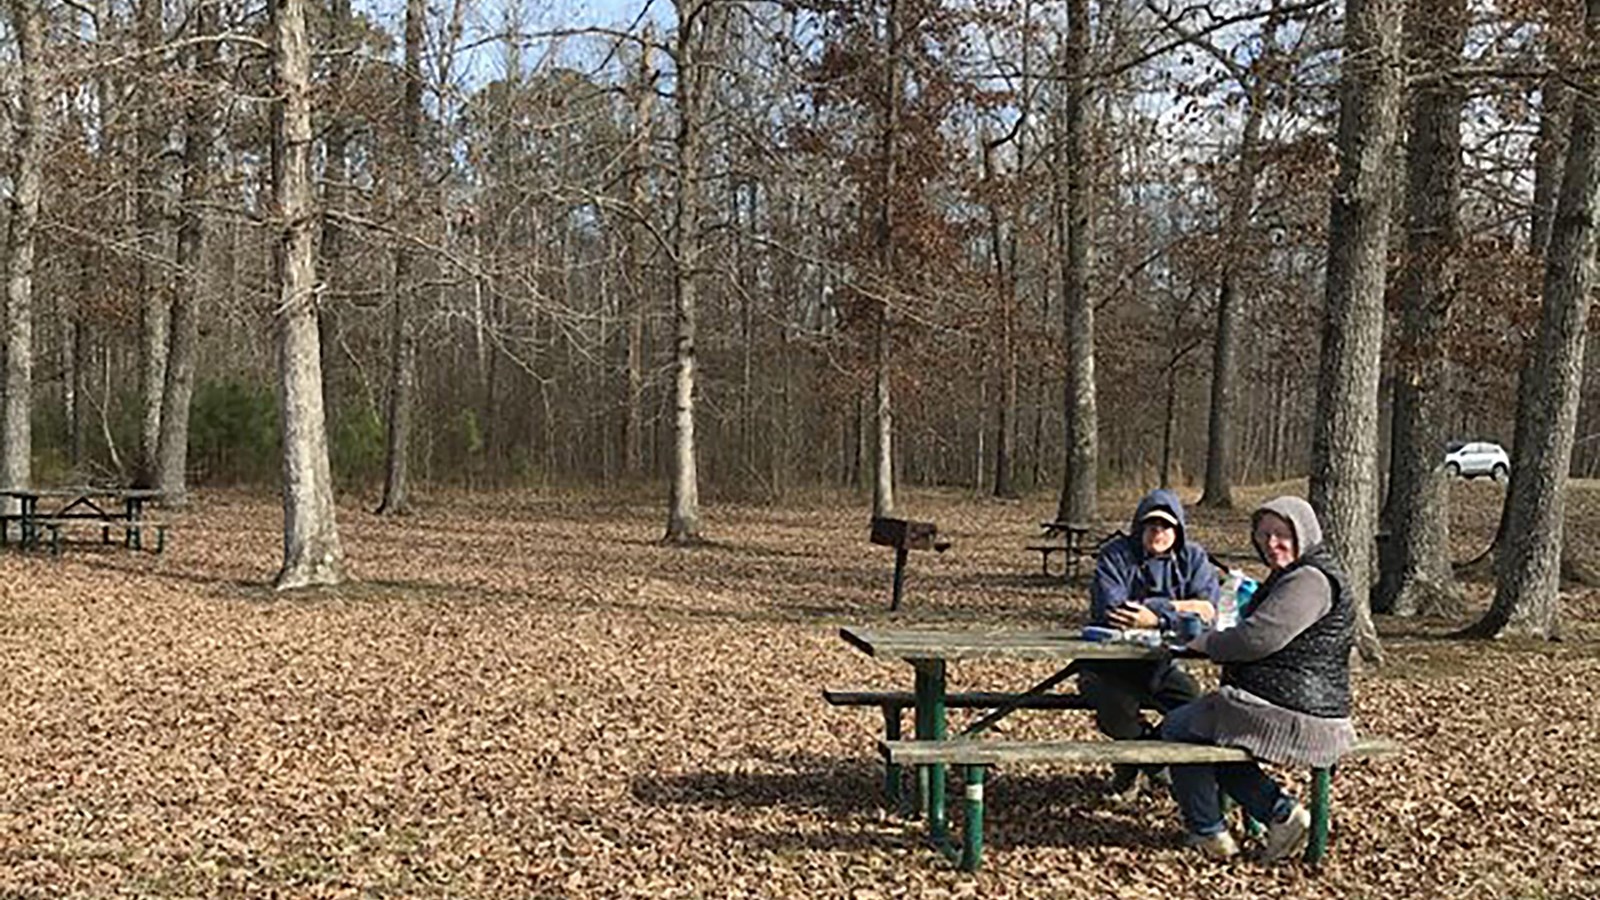 A picnic table with two people bundled in hats and coats eating, in a the midst of leafless trees. 